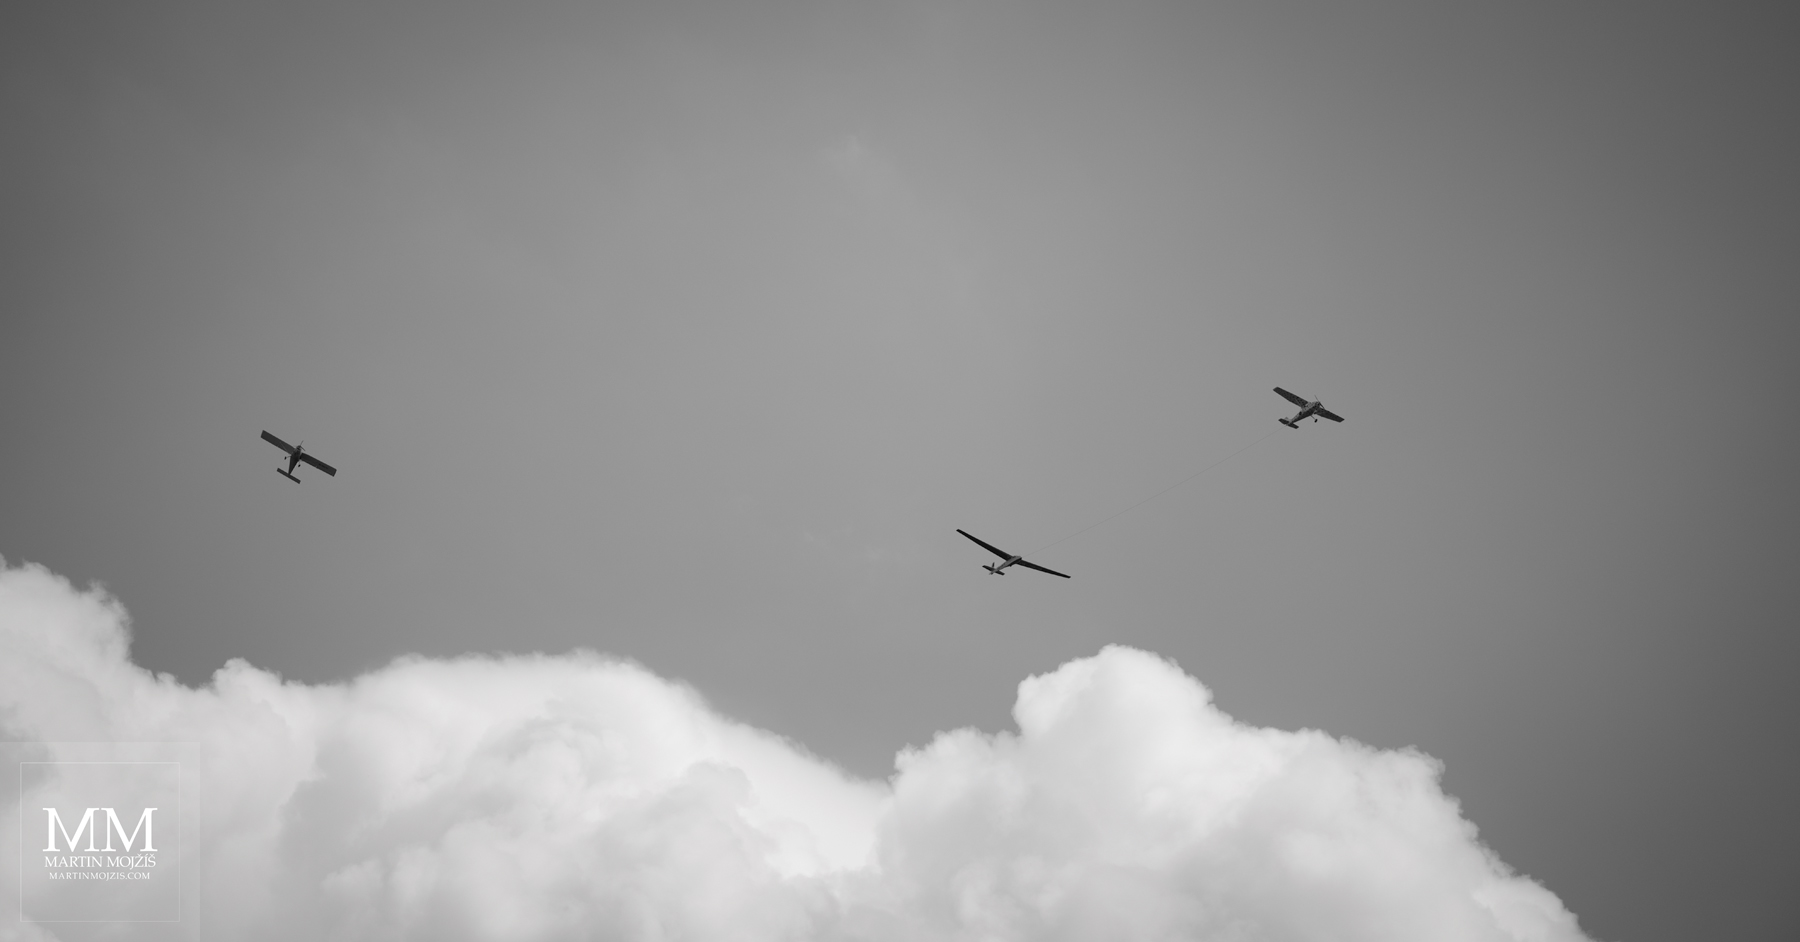 Three flying planes, white cloud. Fine art black and white photograph ON THE BEGINNING OF THE SUMMER II, photographed by Martin Mojzis.